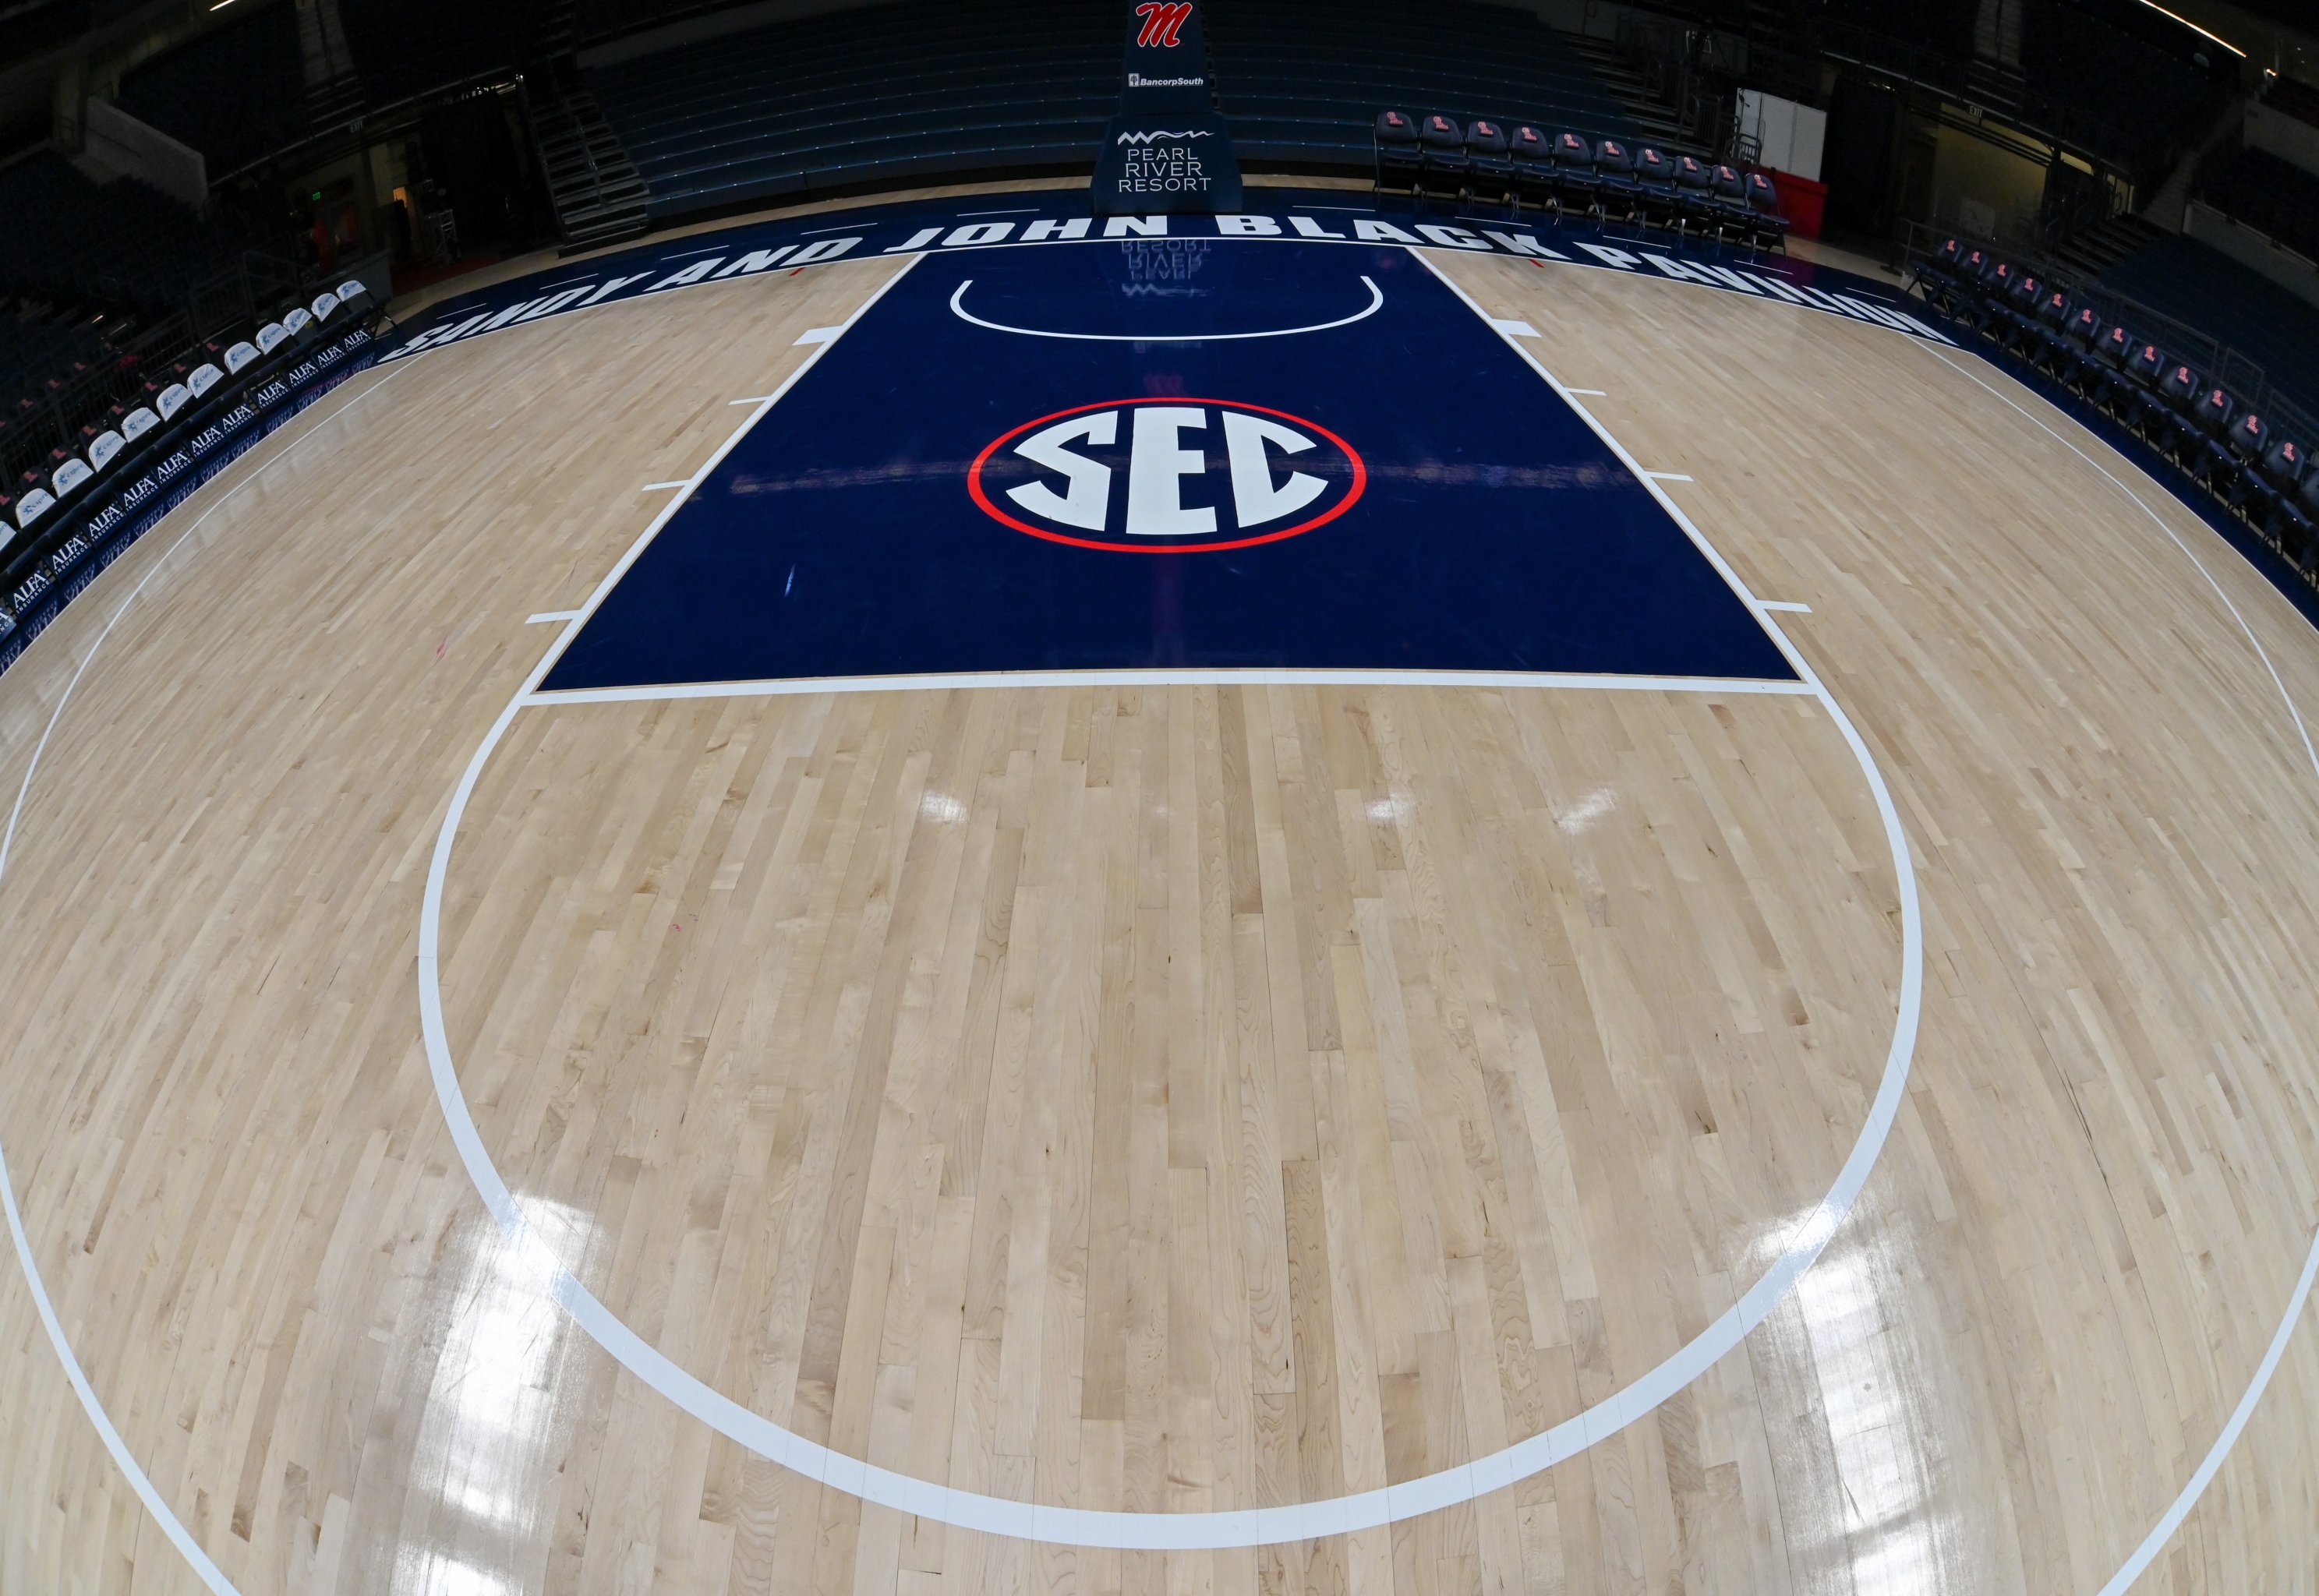 SEC men's basketball field set for Amalie Arena - The Tampa Bay 100